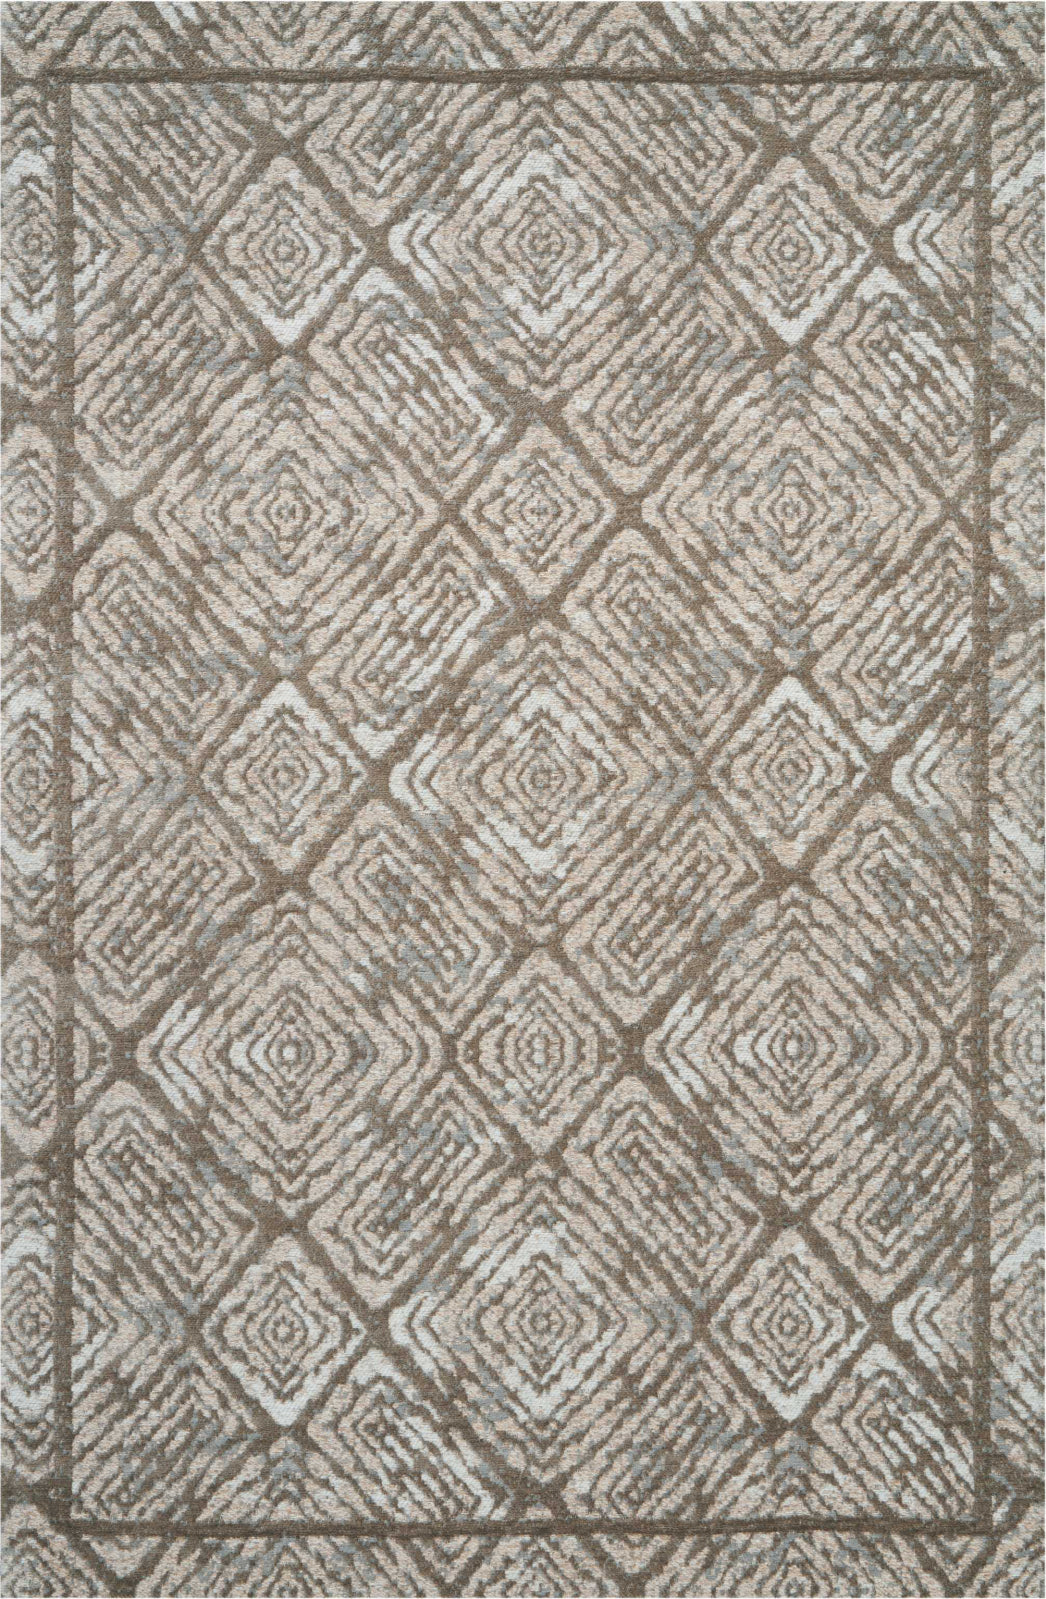 Nourison Studio Nyc Collection OM002 Fossil Area Rug by Design